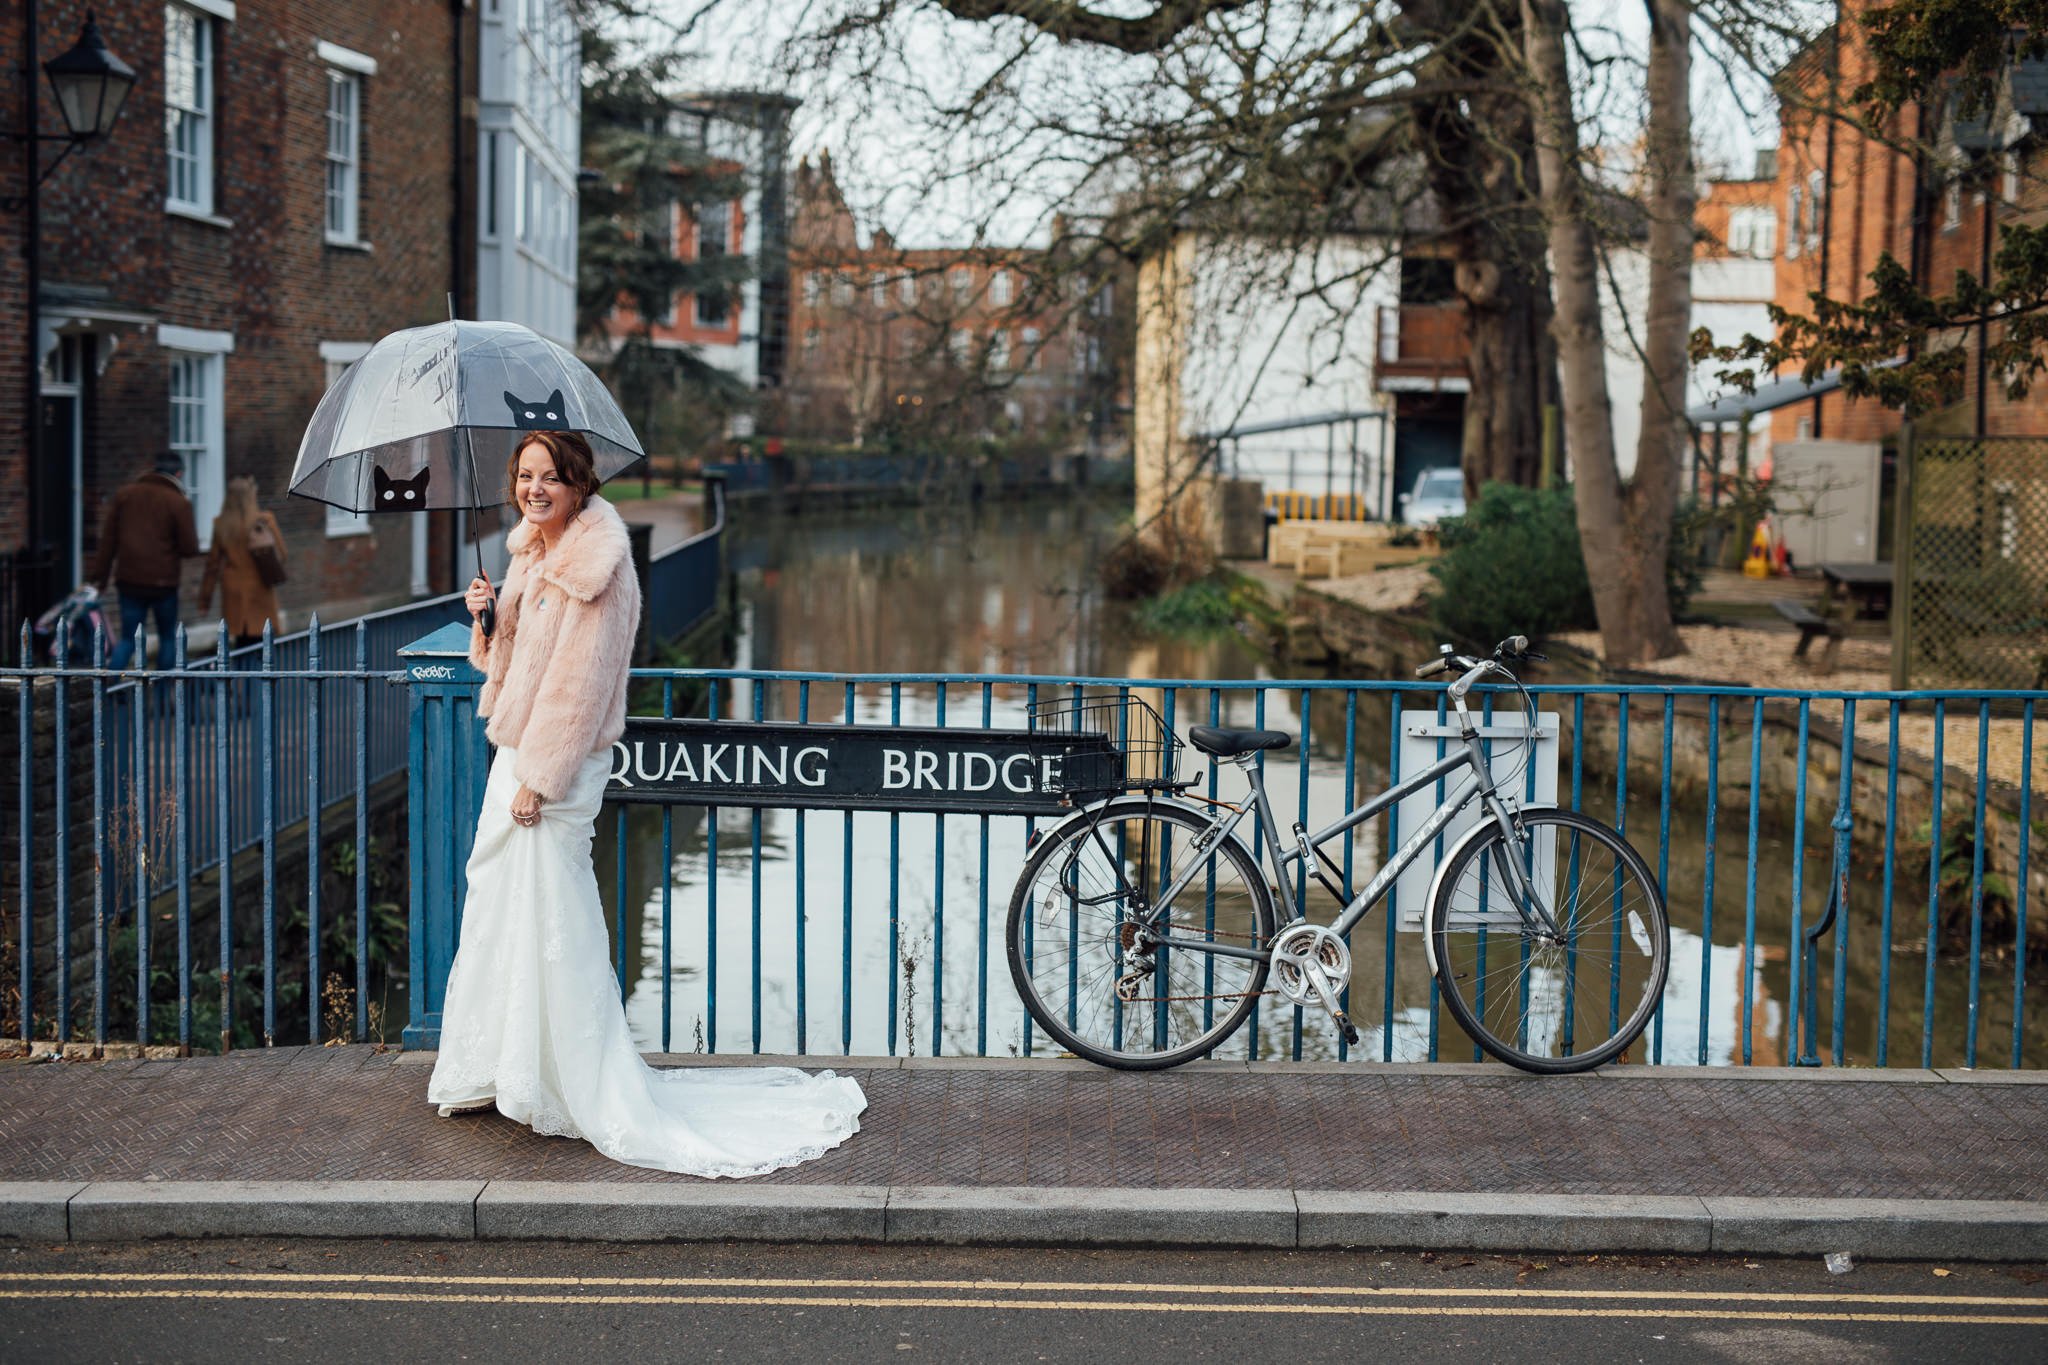  Bride walking across Quasking Bride in Oxford whilst holding an umbrella with a picture of a cat on it. 